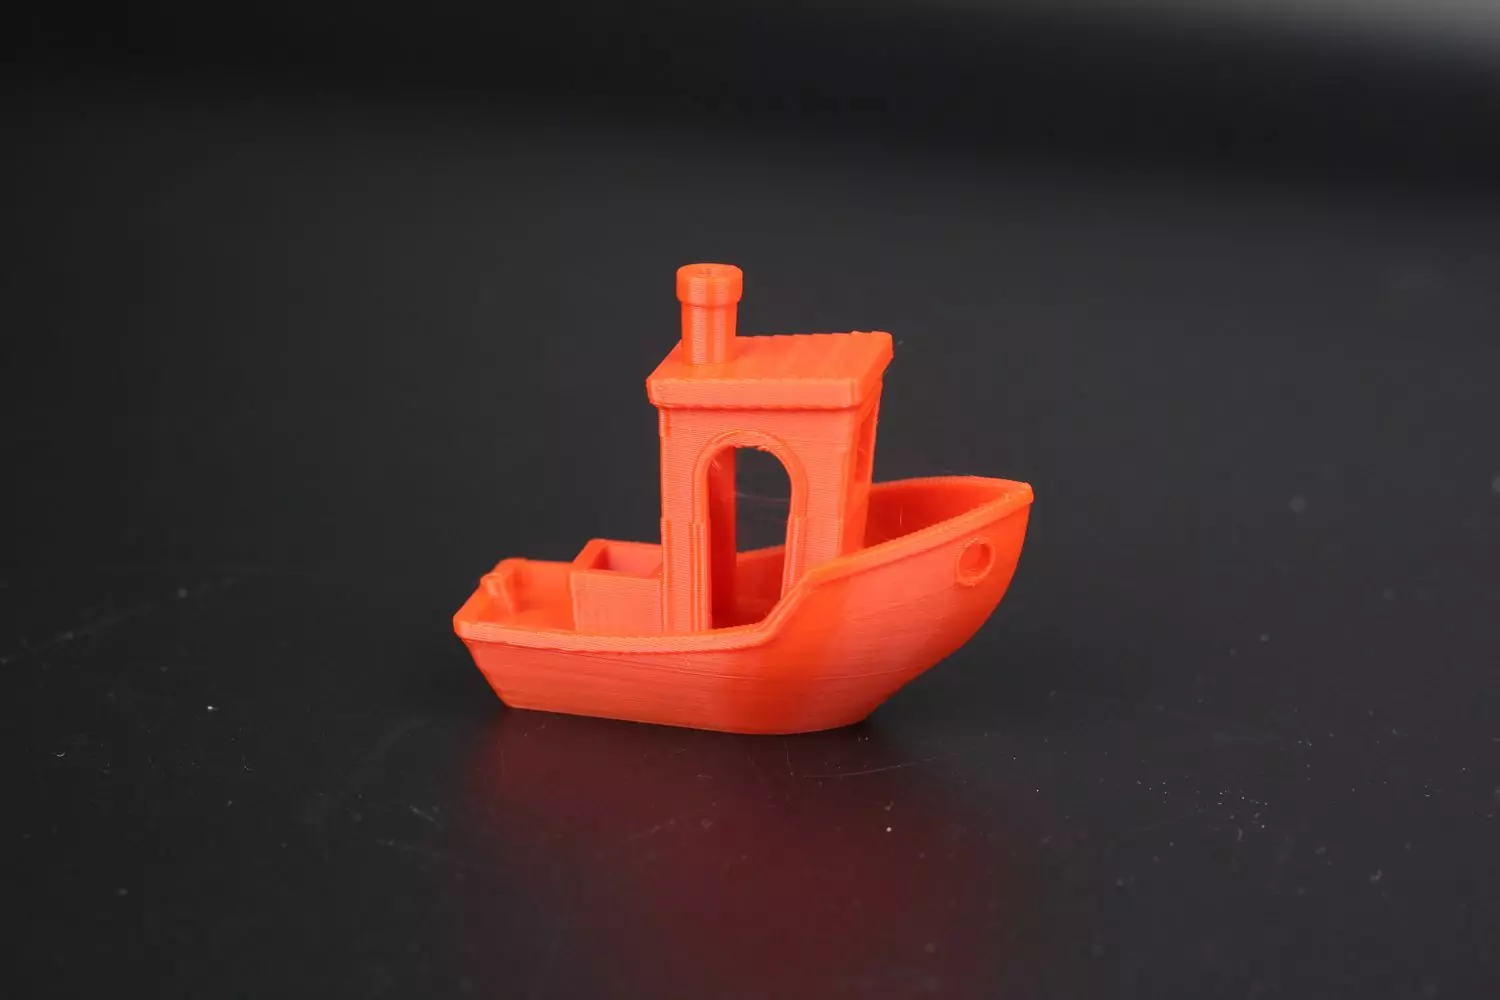 3D benchy printed on Ender 3 S1 Pro with Klipper and Sonic Pad1 | Creality Sonic Pad Review: Klipper Firmware with Compromises